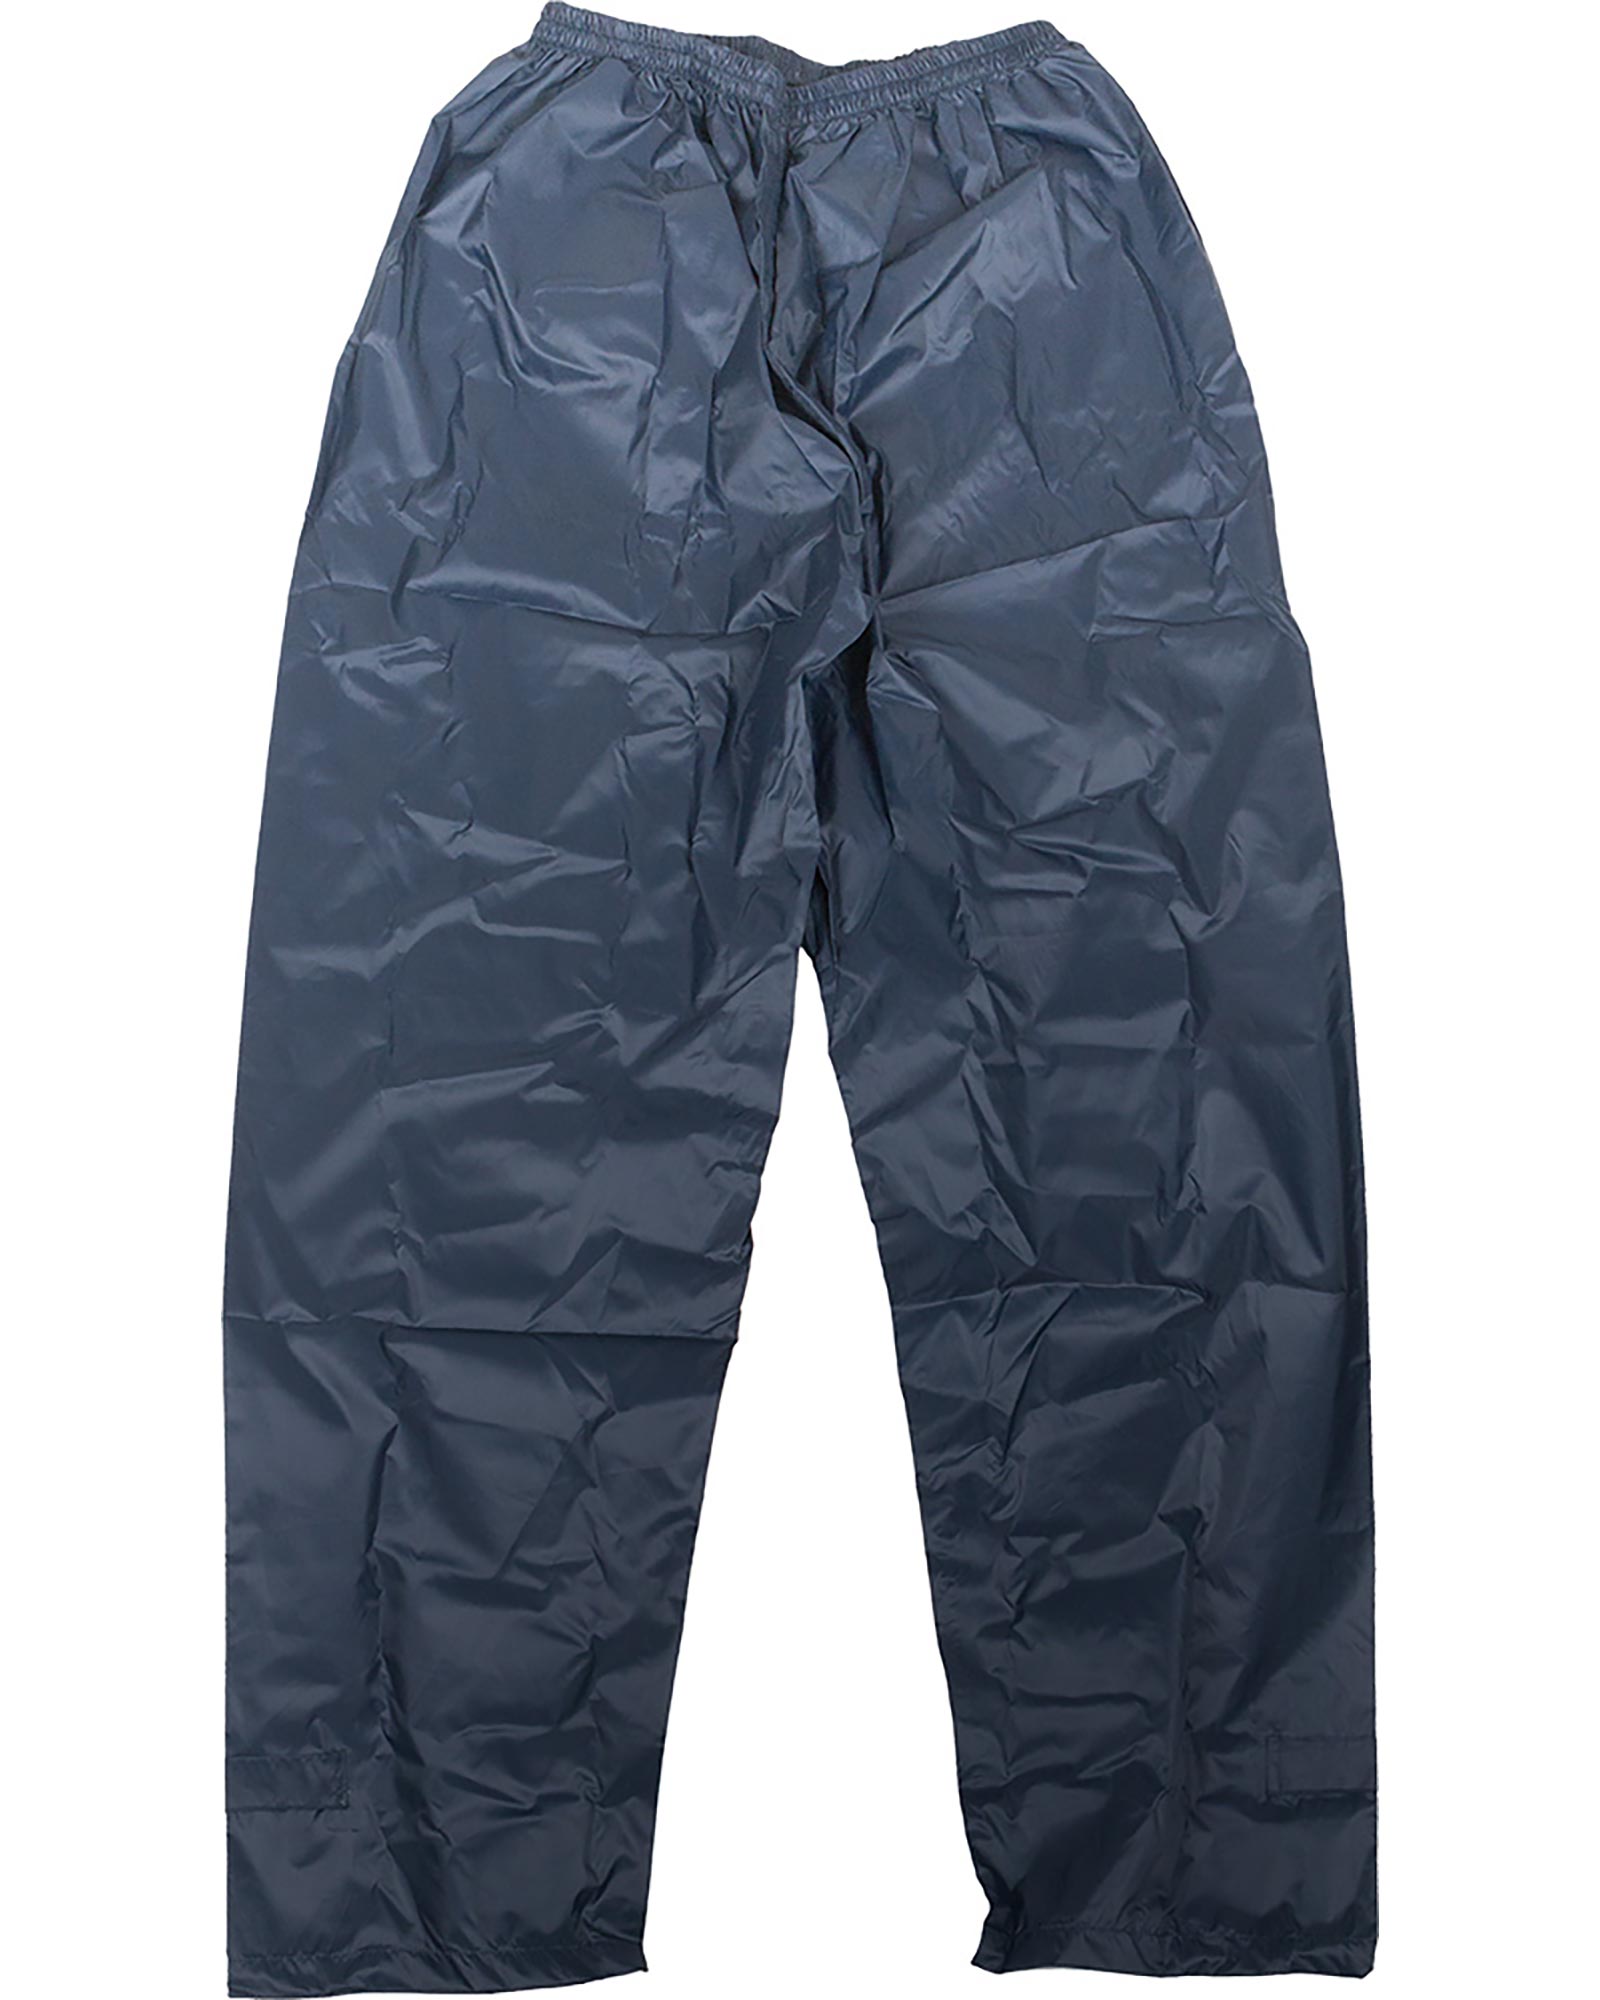 Target Dry Mac in a Sac Adult Packable Waterproof Overtrousers - Navy S